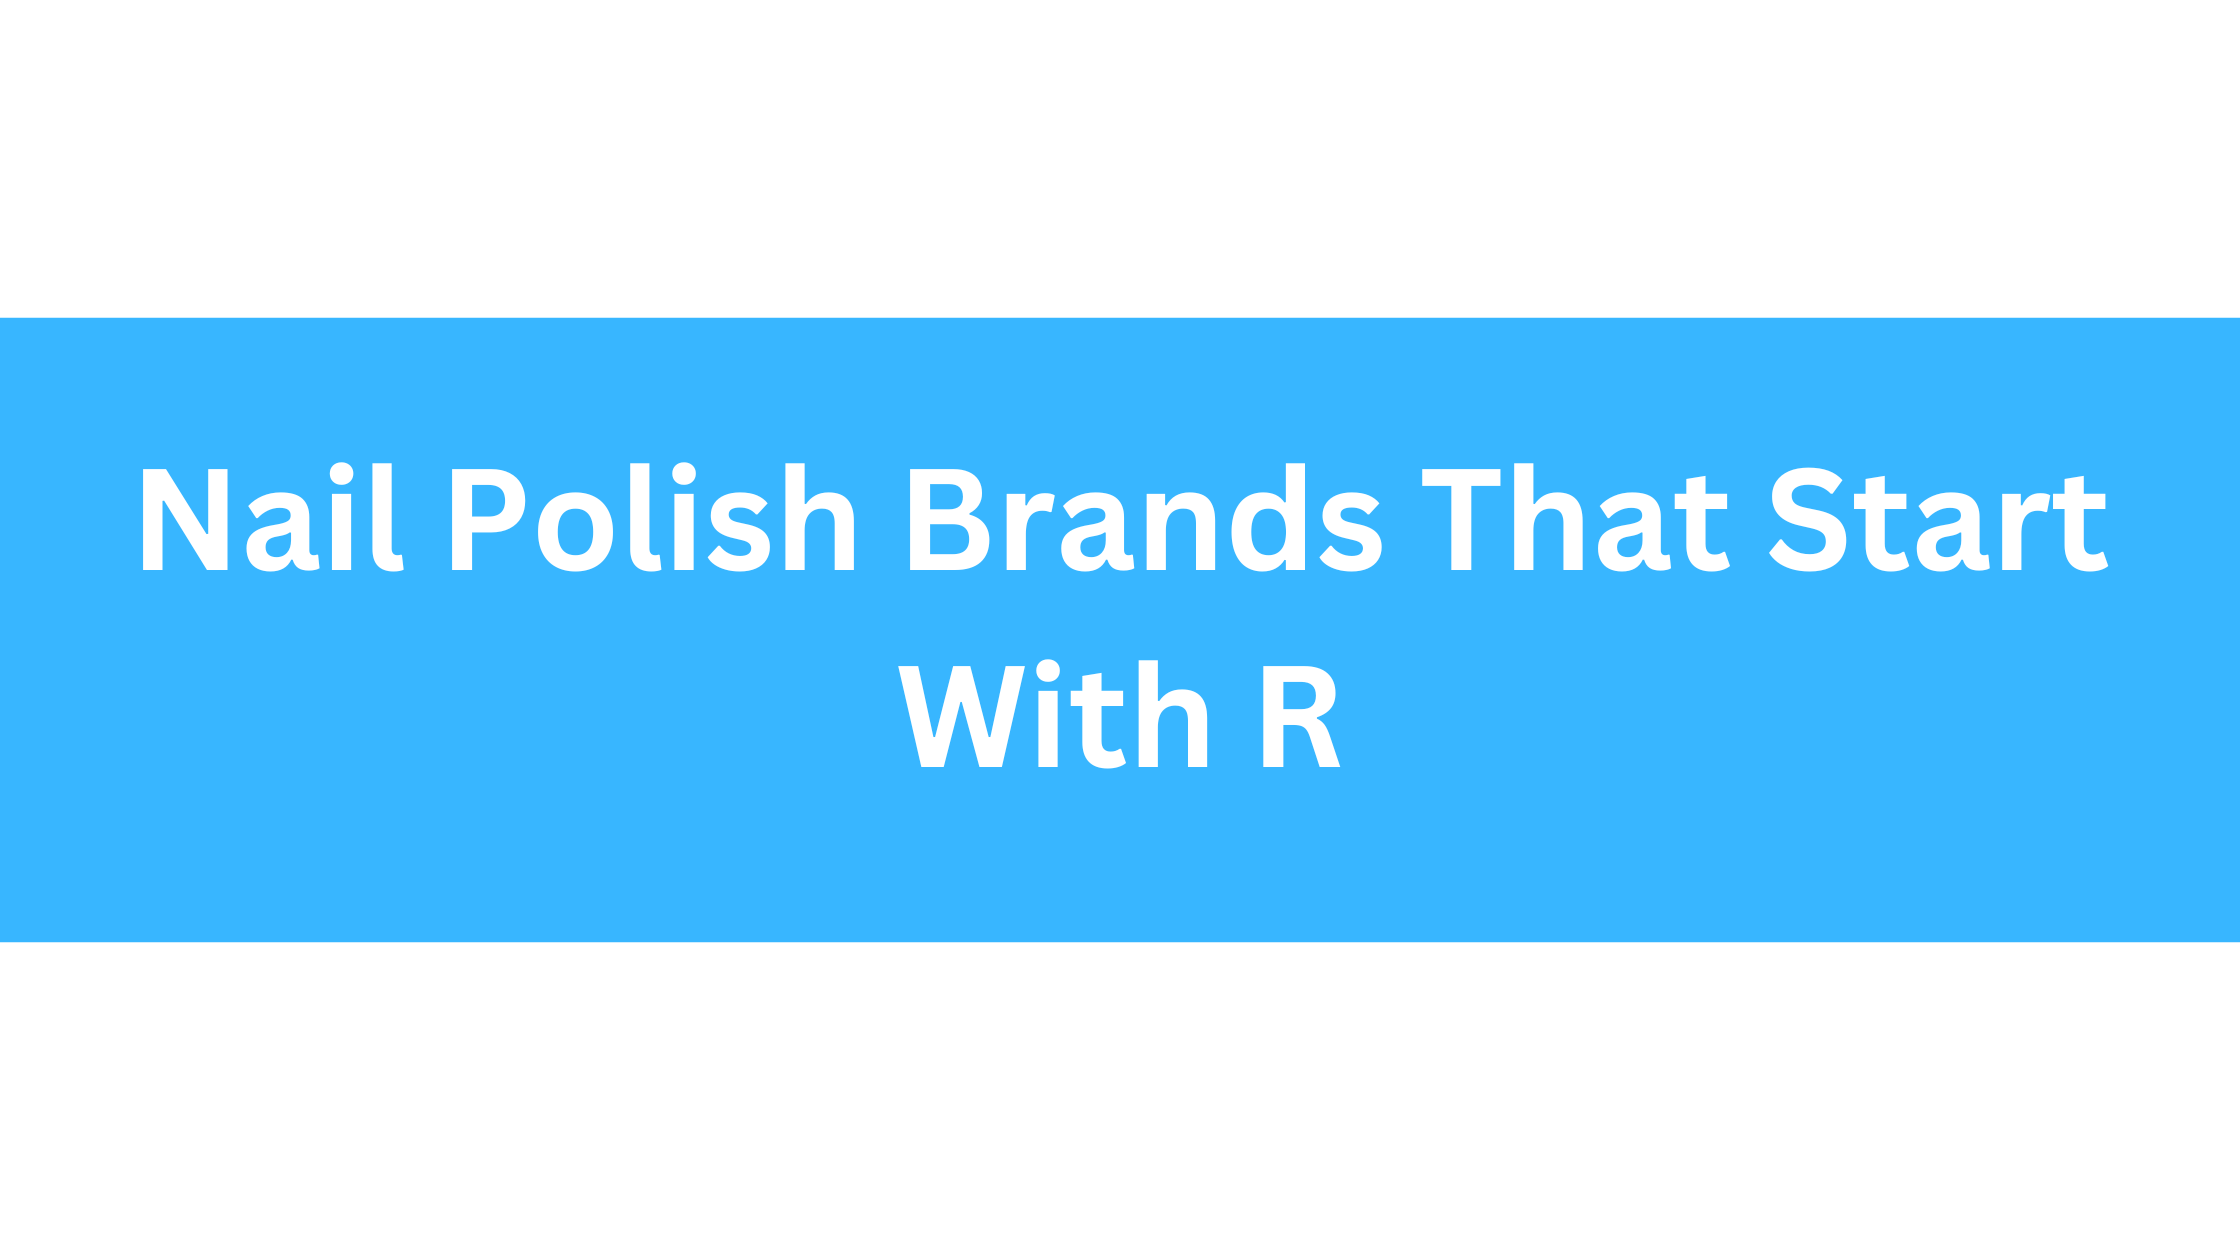 Nail Polish Brands That Start With R